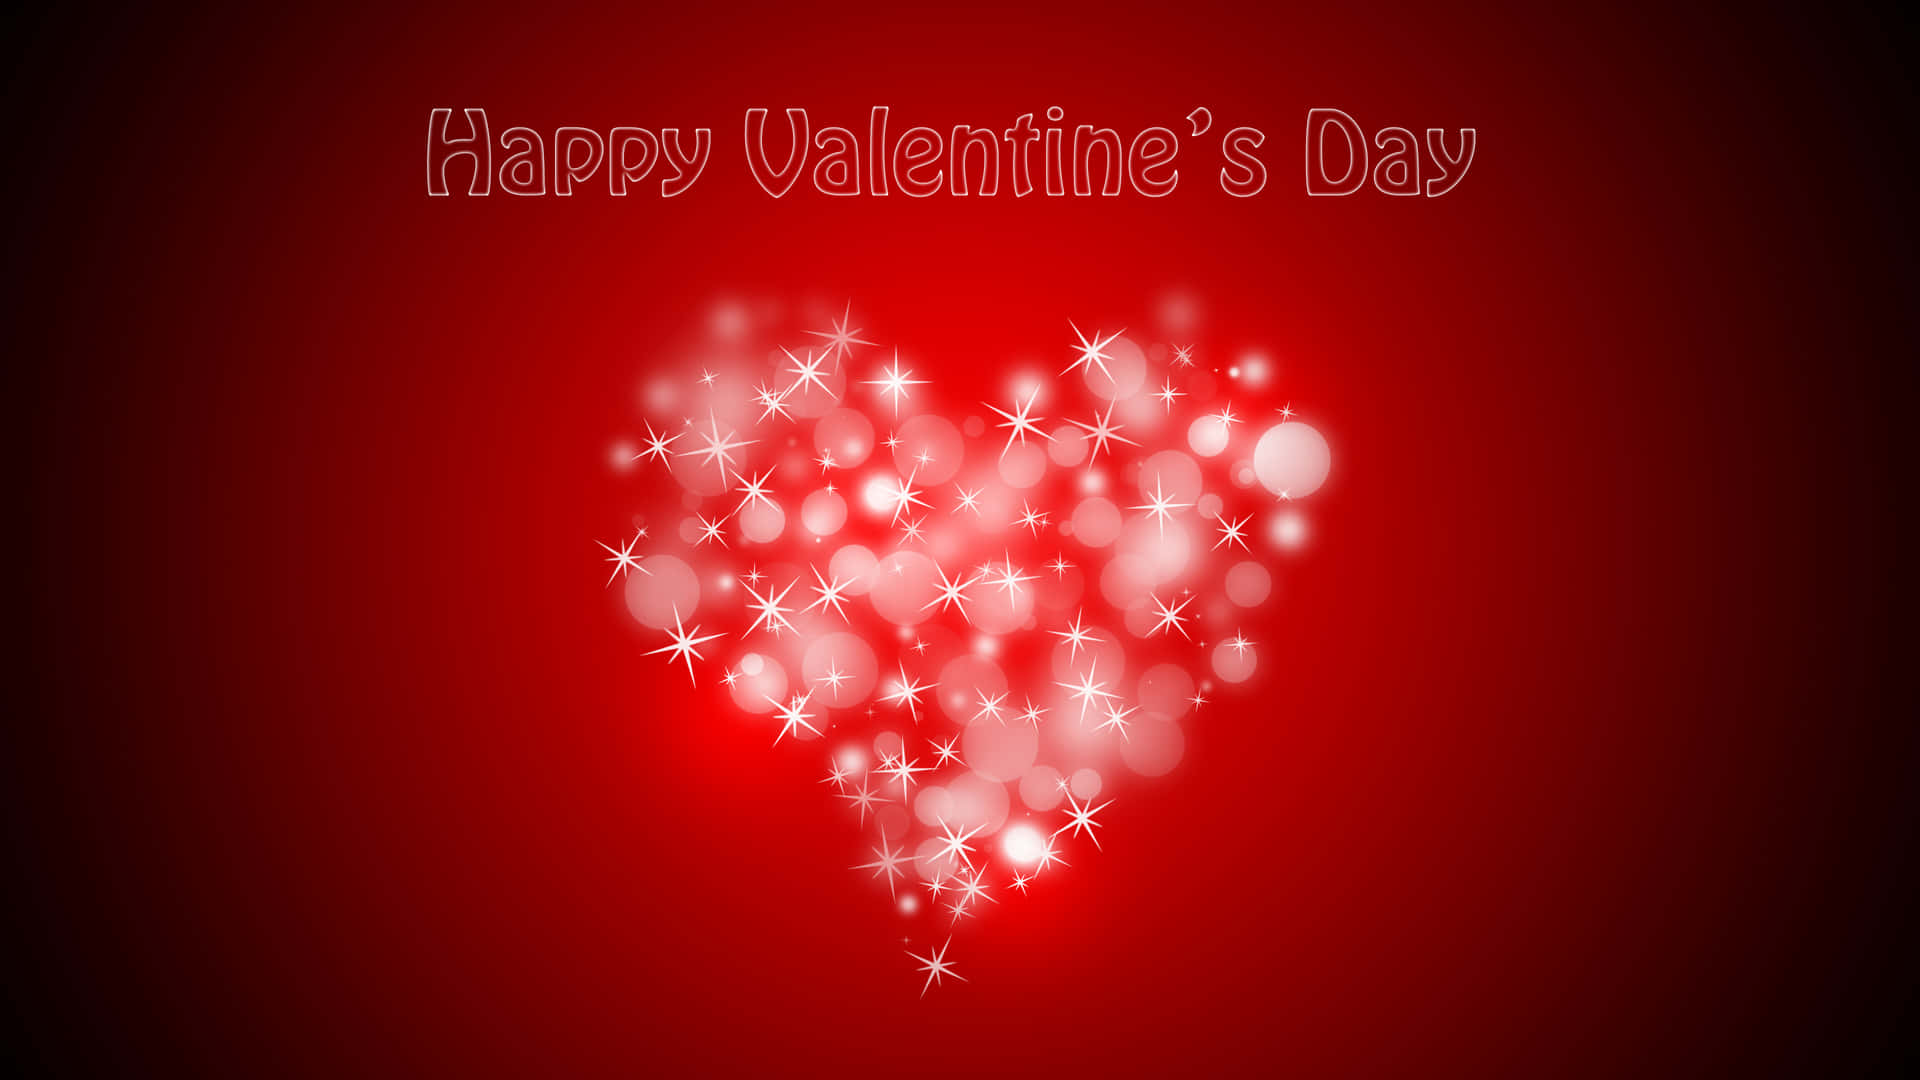 Happy Valentine's Day Background With A Heart